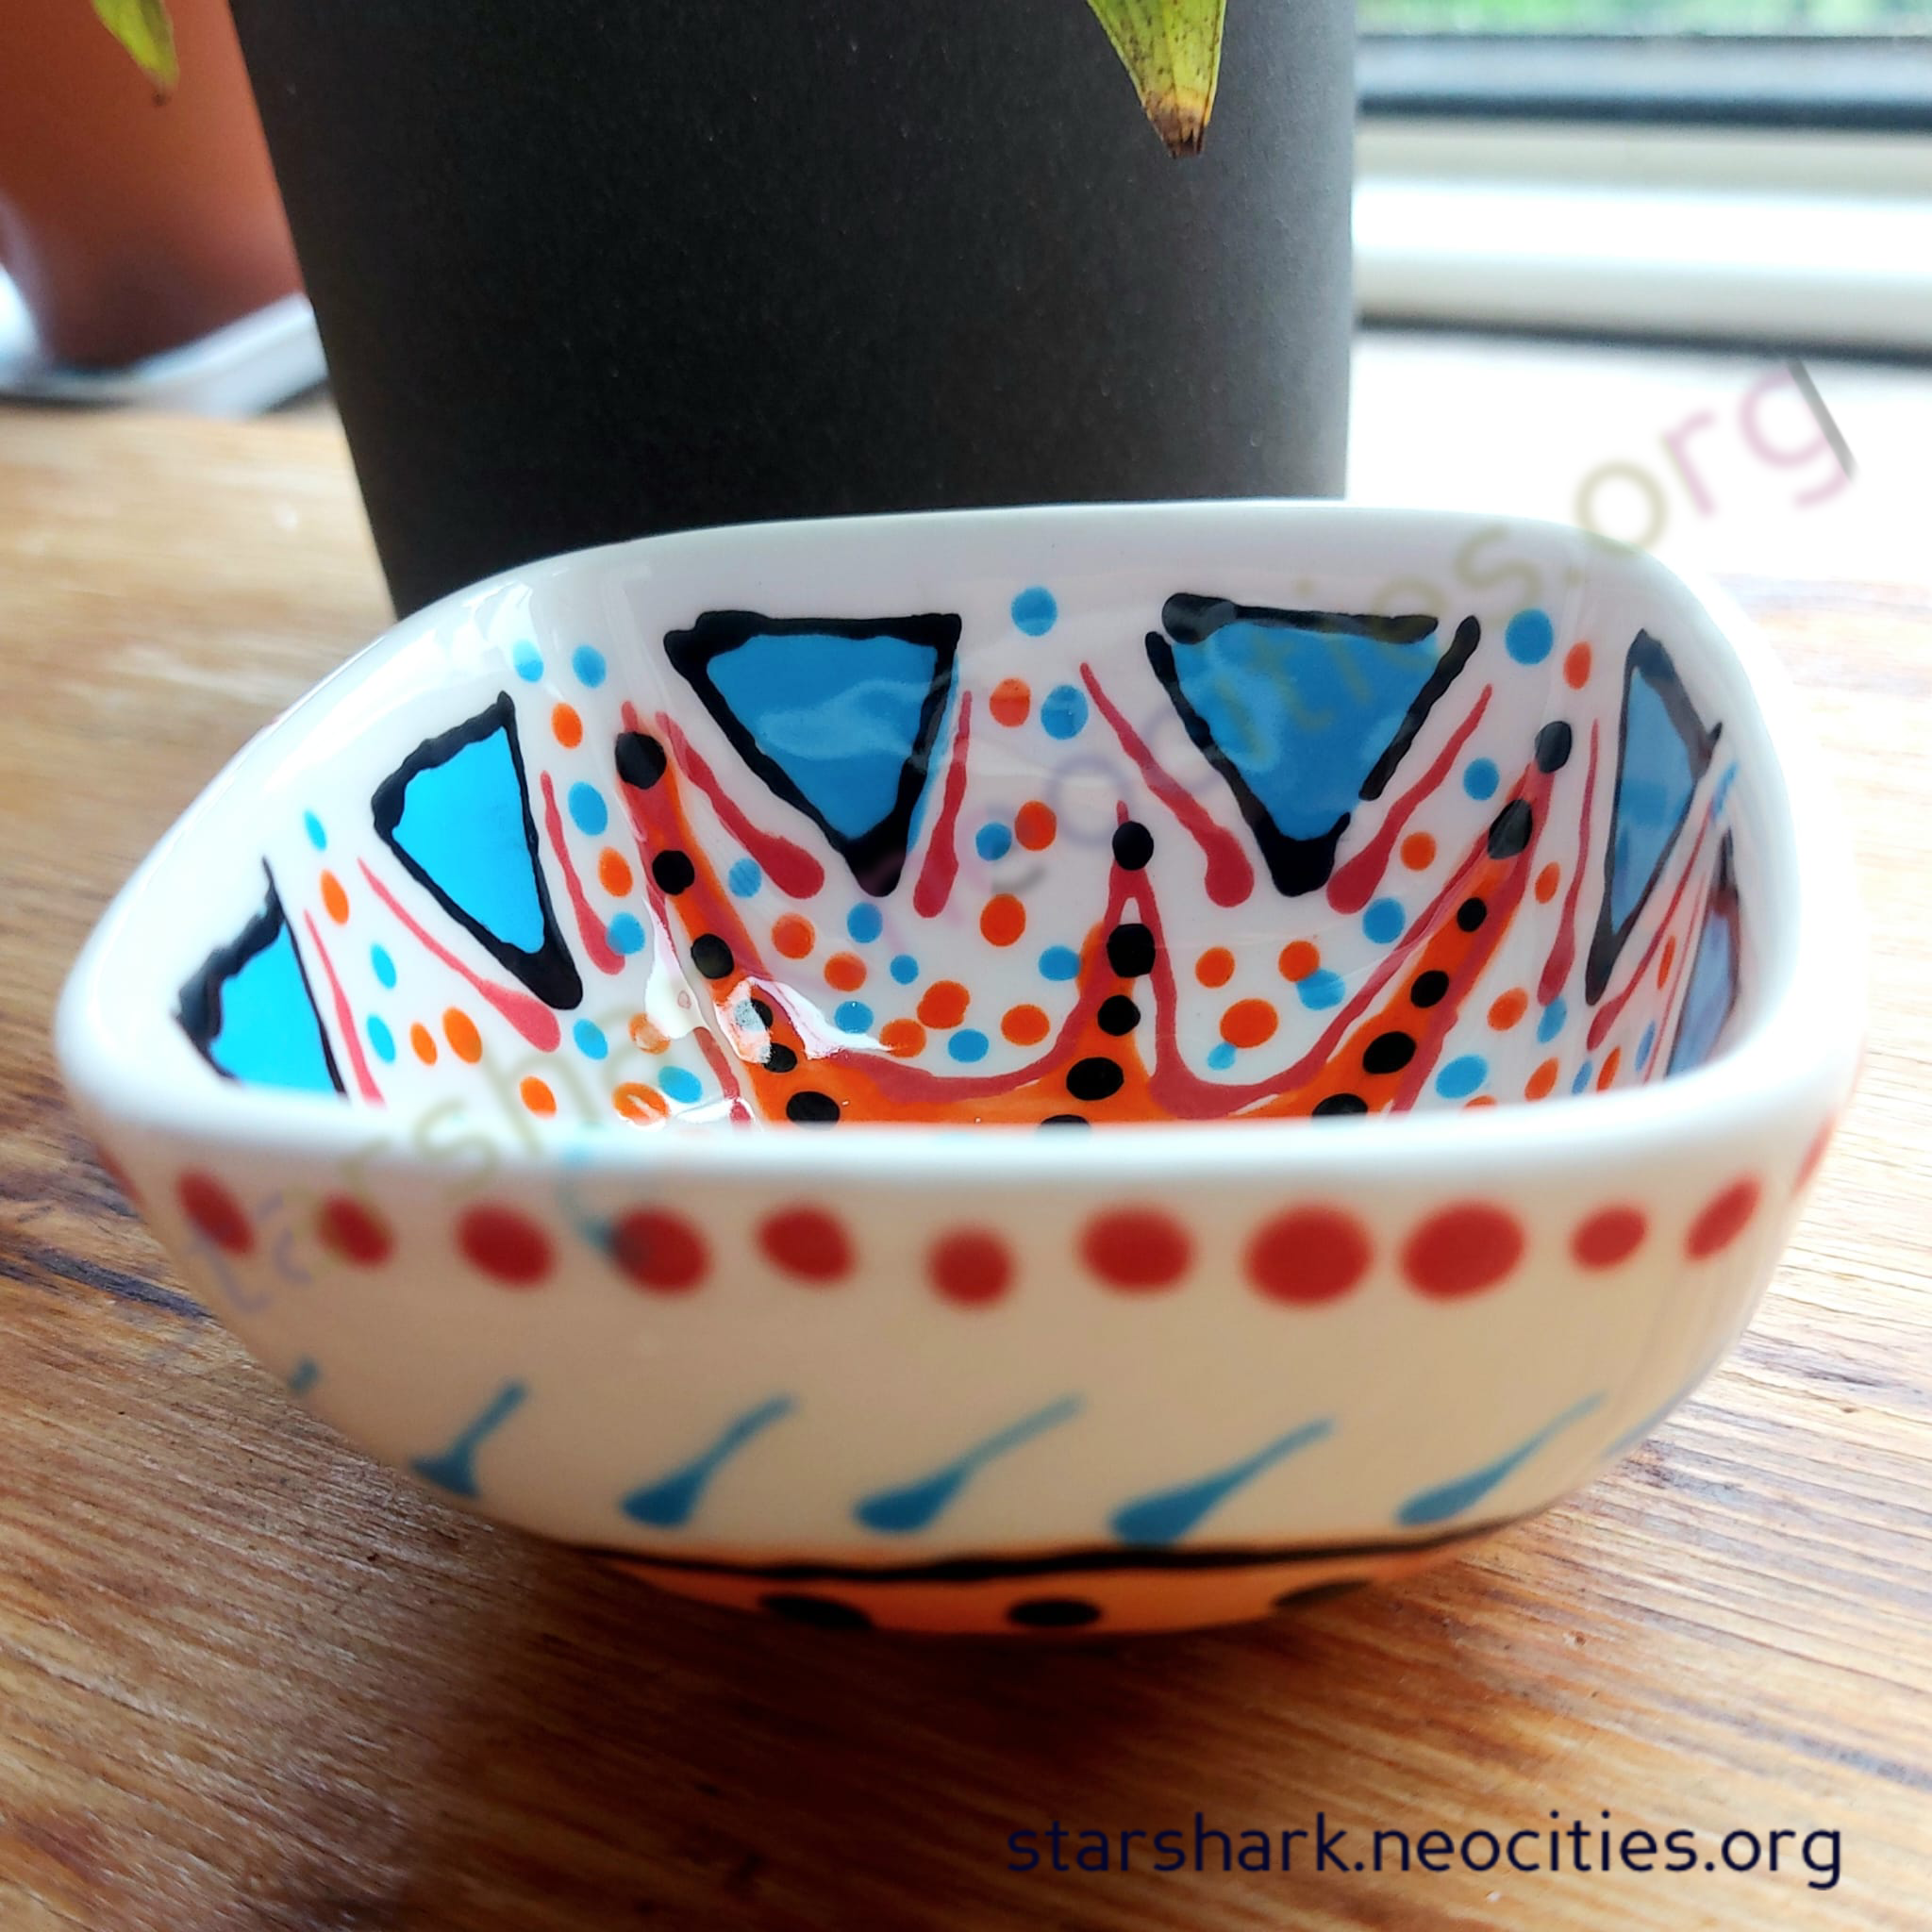 the first small ceramic trinket bowl with blue, orange, red and black designs.